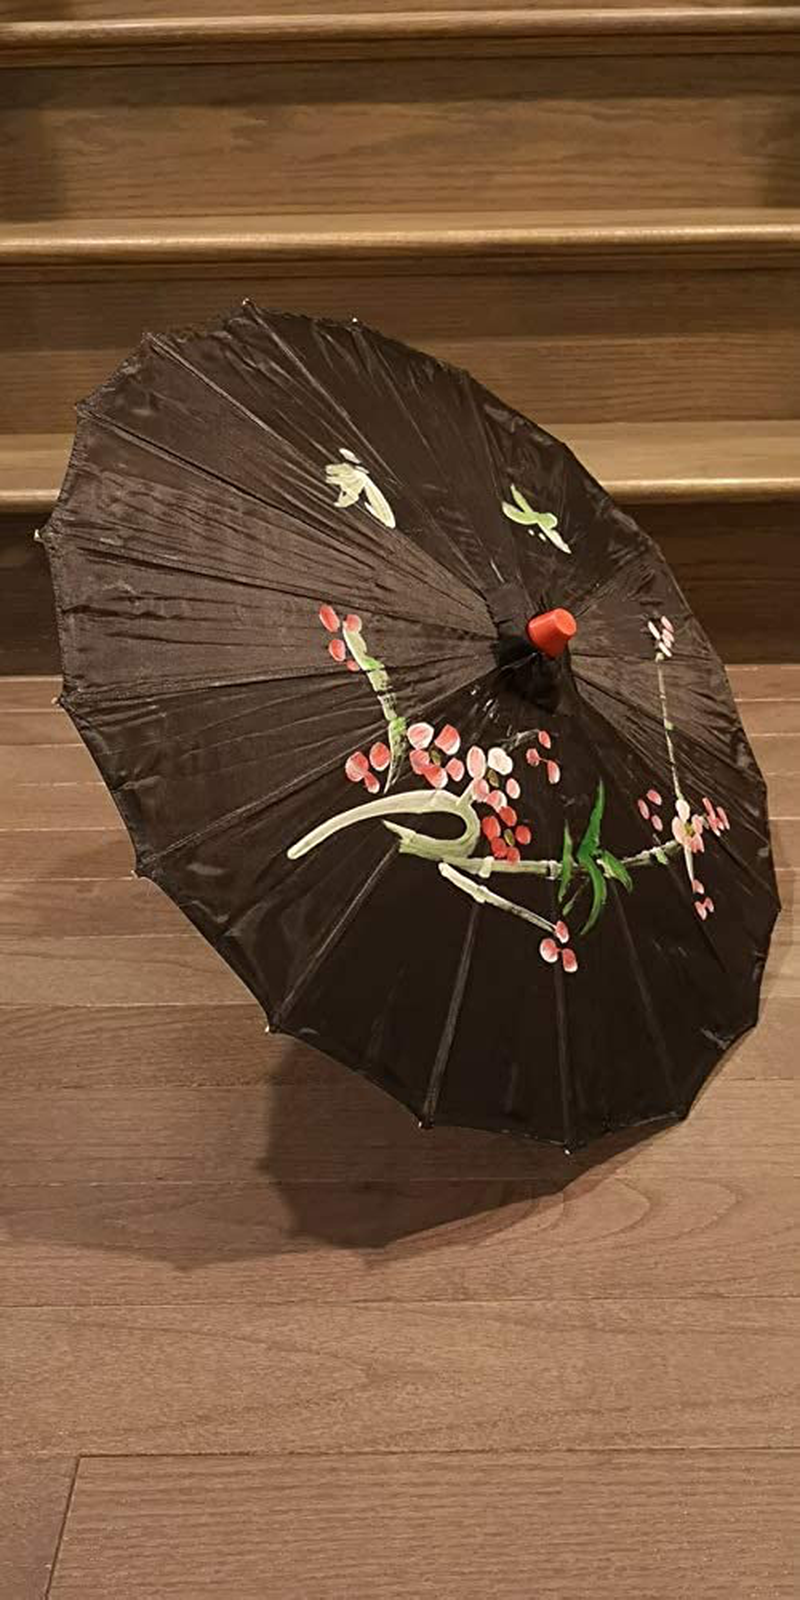 TJ GLOBAL 22" Kid's Chinese Japanese Umbrella Parasol for Wedding Parties, Photography, Costumes, Cosplay, Decoration (Black)